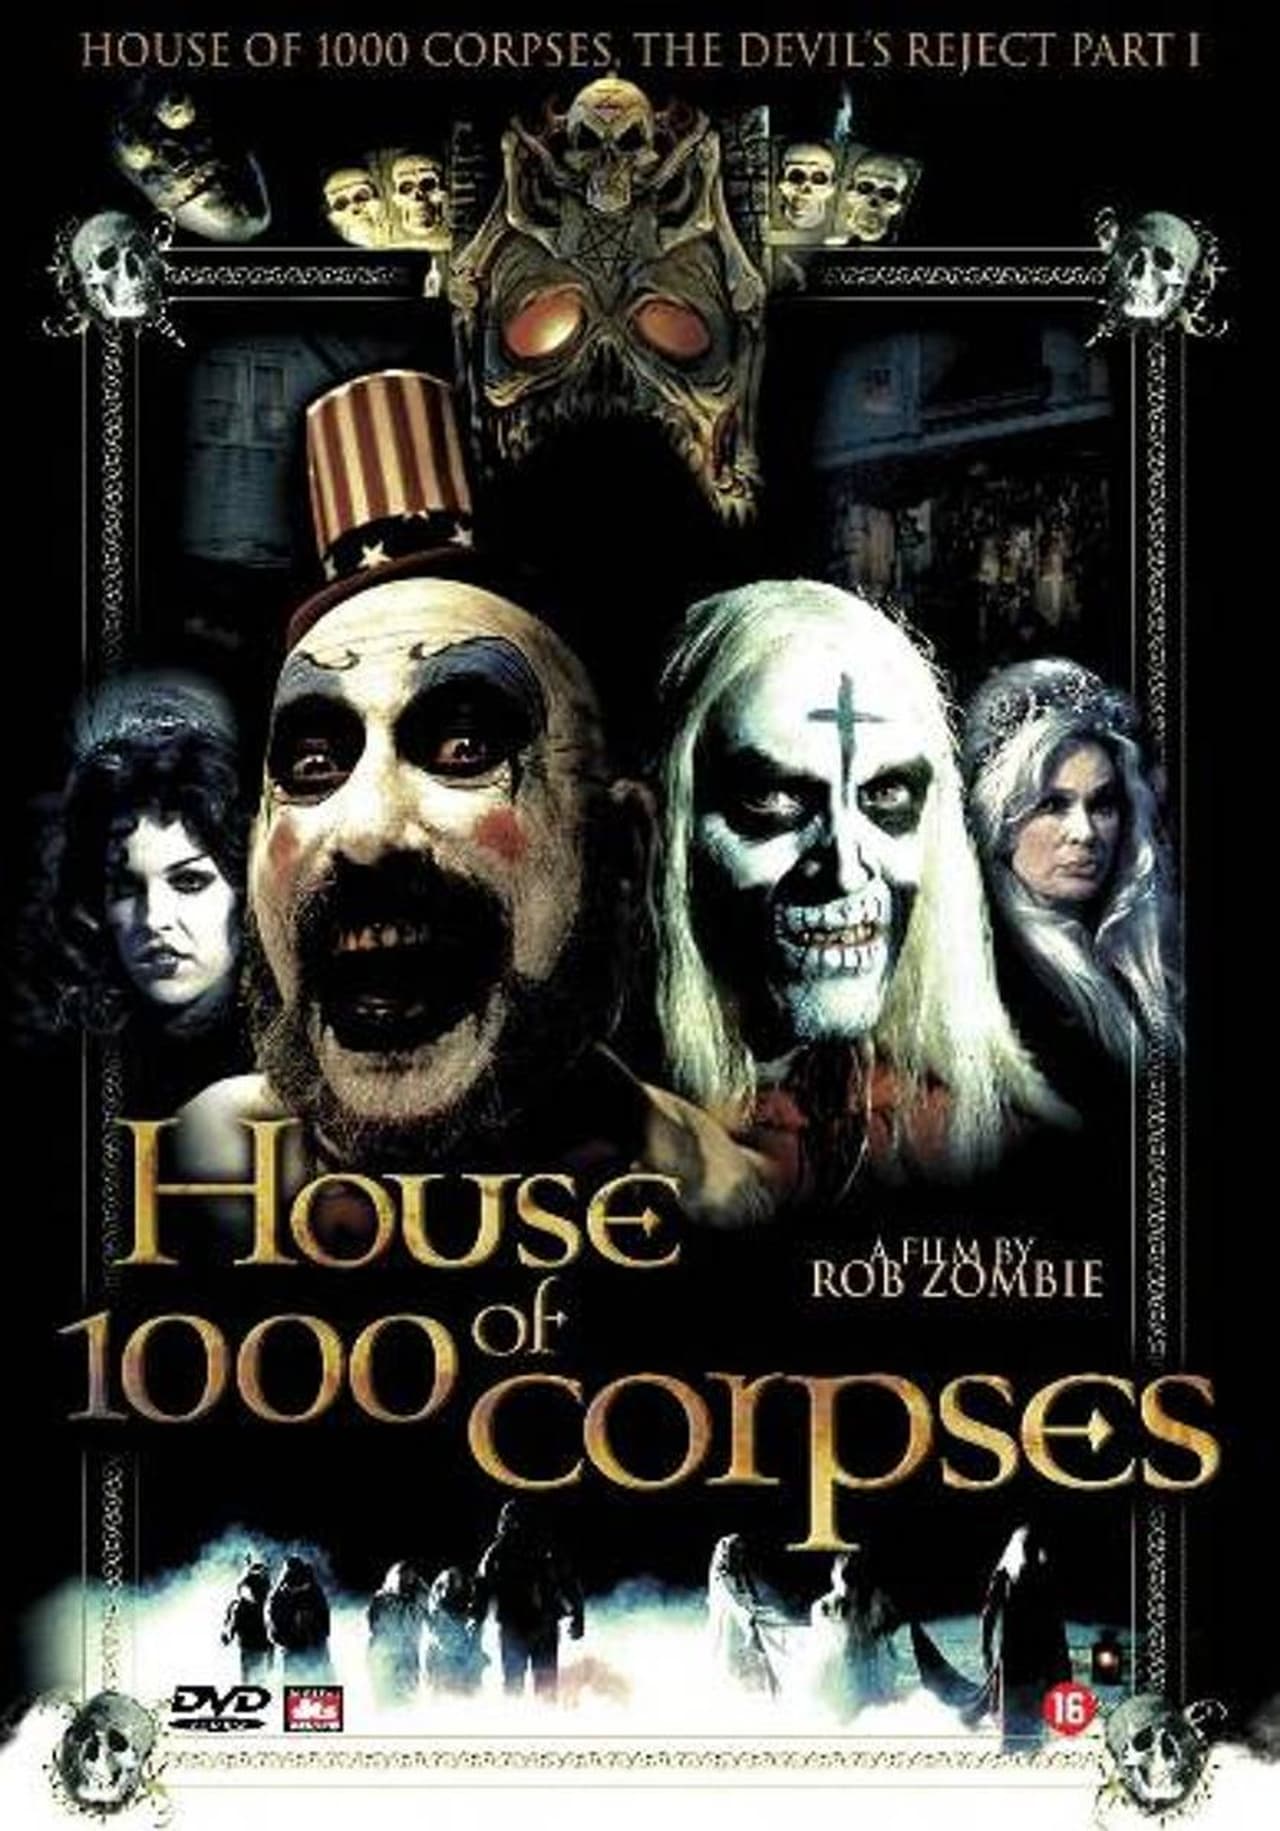 House of 1000 Corpses (2003) 640Kbps 23.976Fps 48Khz 5.1Ch DD+ NF E-AC3 Turkish Audio TAC